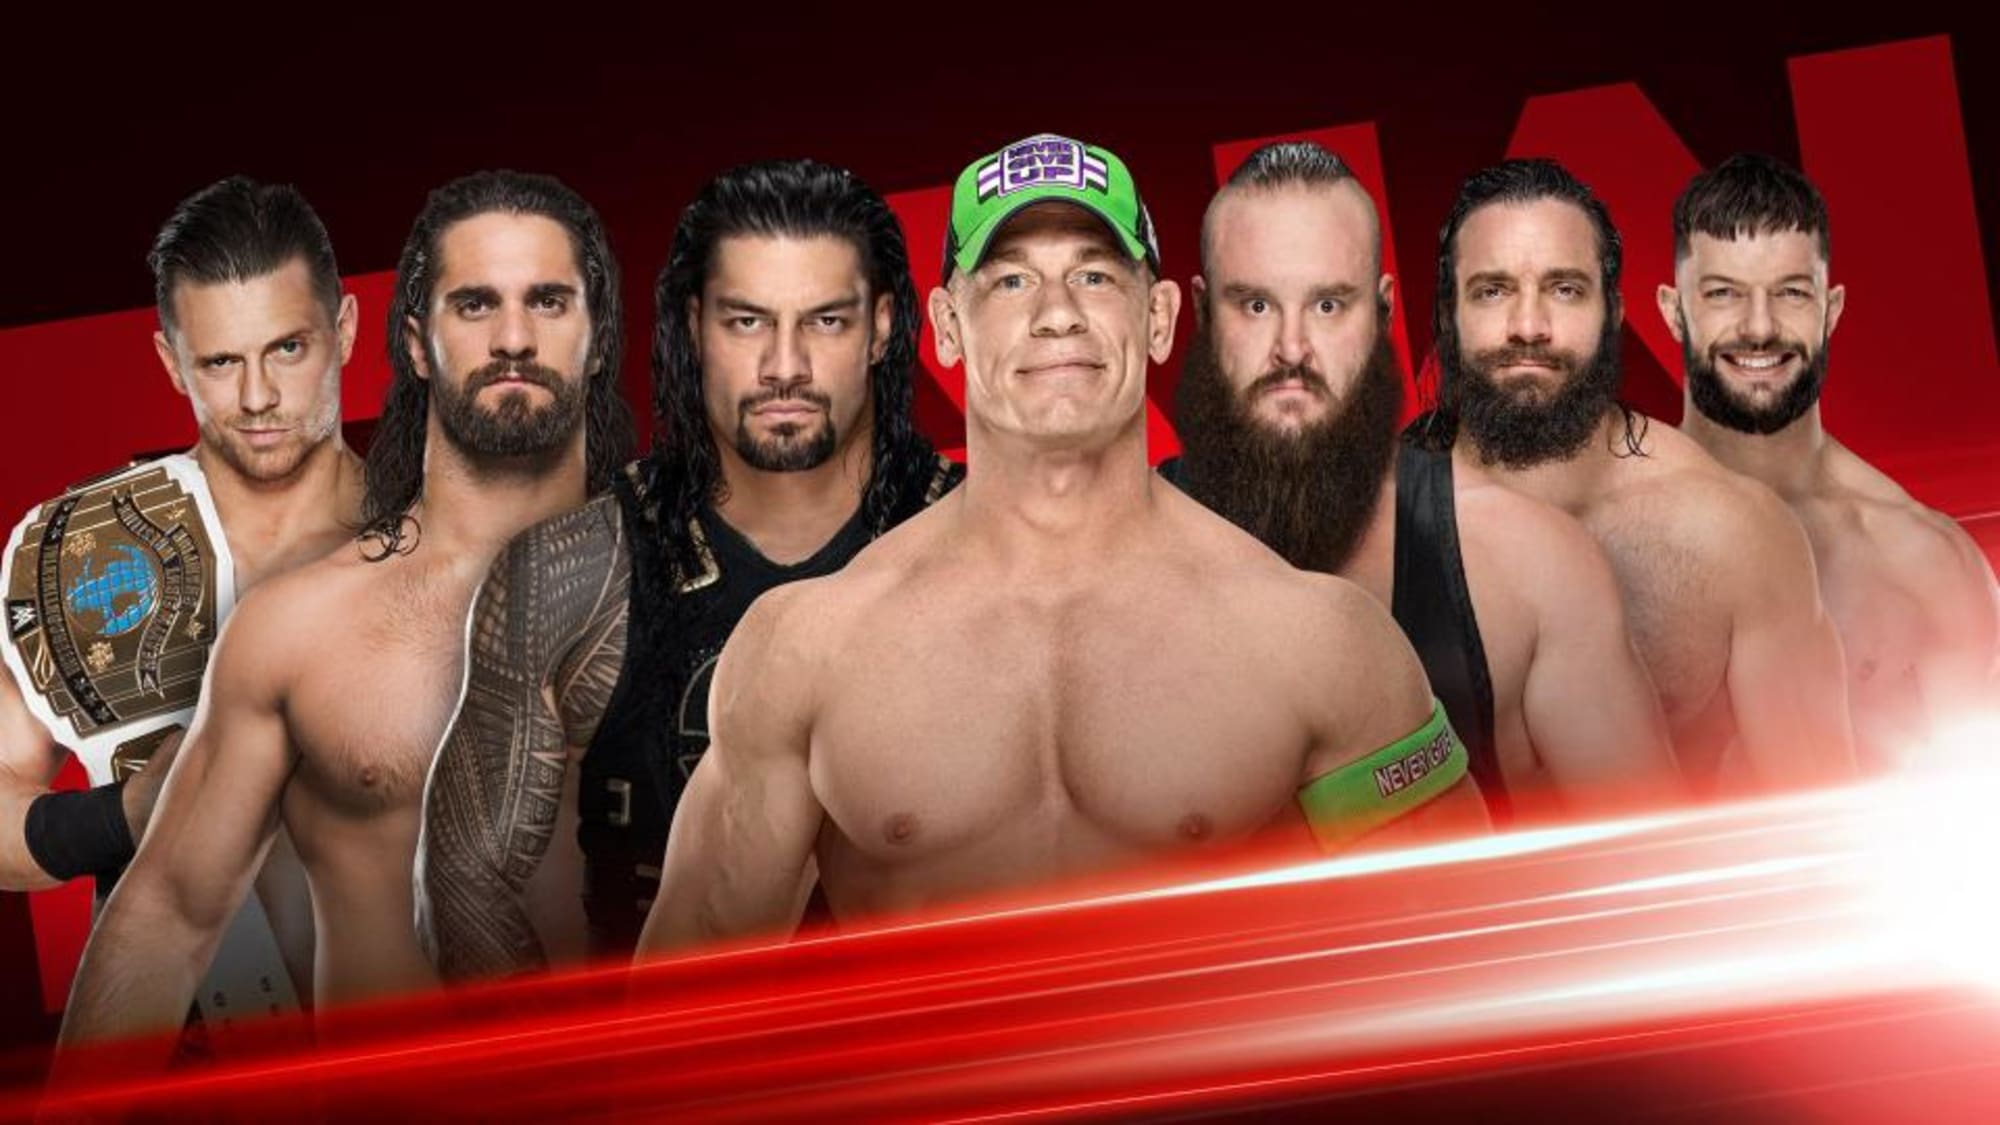 WWE has finally figured out how to make the most of the 3hr Raw format